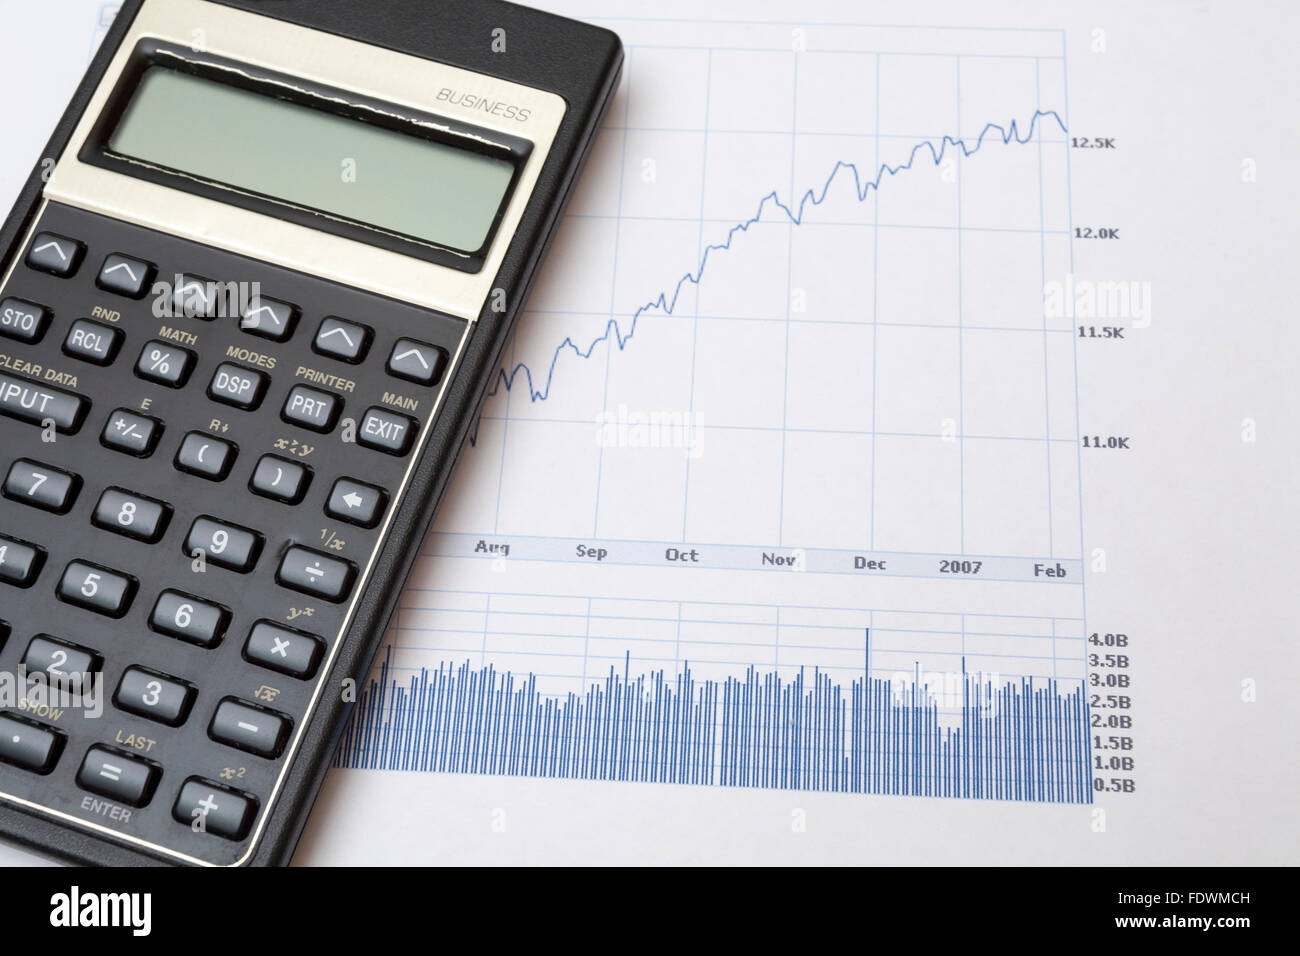 Financial market or economy line graph chart and business calculator  Model Release: No.  Property Release: No. Stock Photo